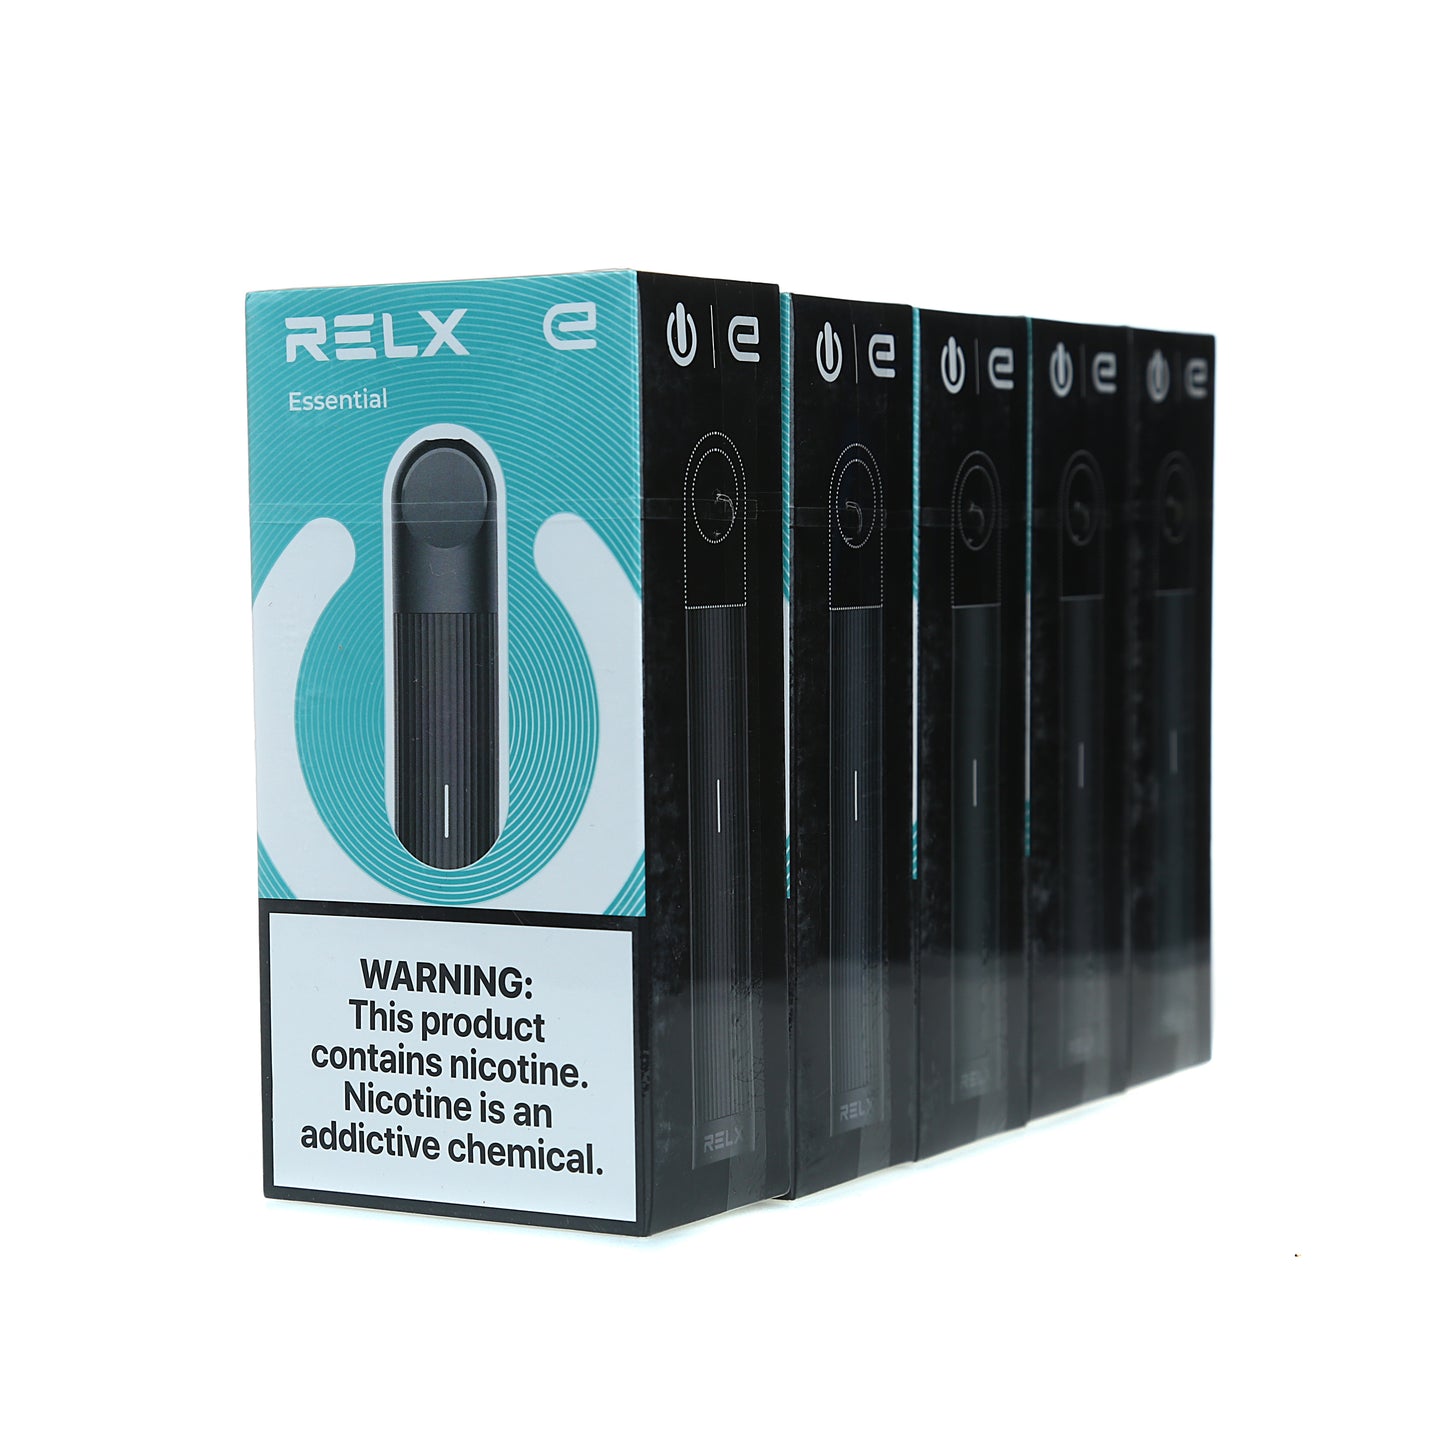 Relx Essential Device Box of 5 - Multiple Colors